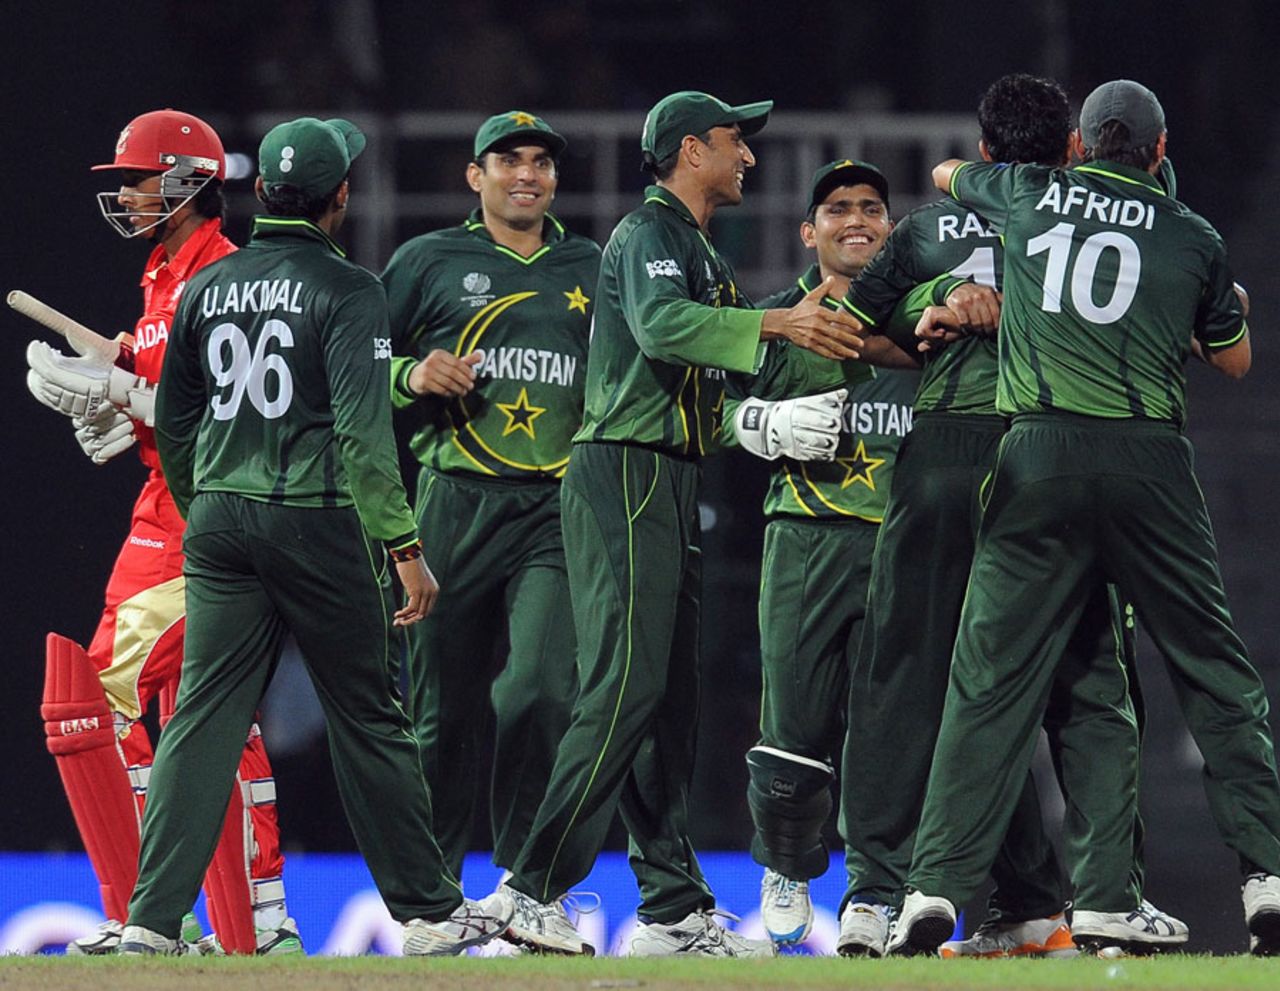 Pakistan get-together after the wicket of Nitish Kumar, Canada v Pakistan, Group A, World Cup 2011, Colombo, March 3, 2011